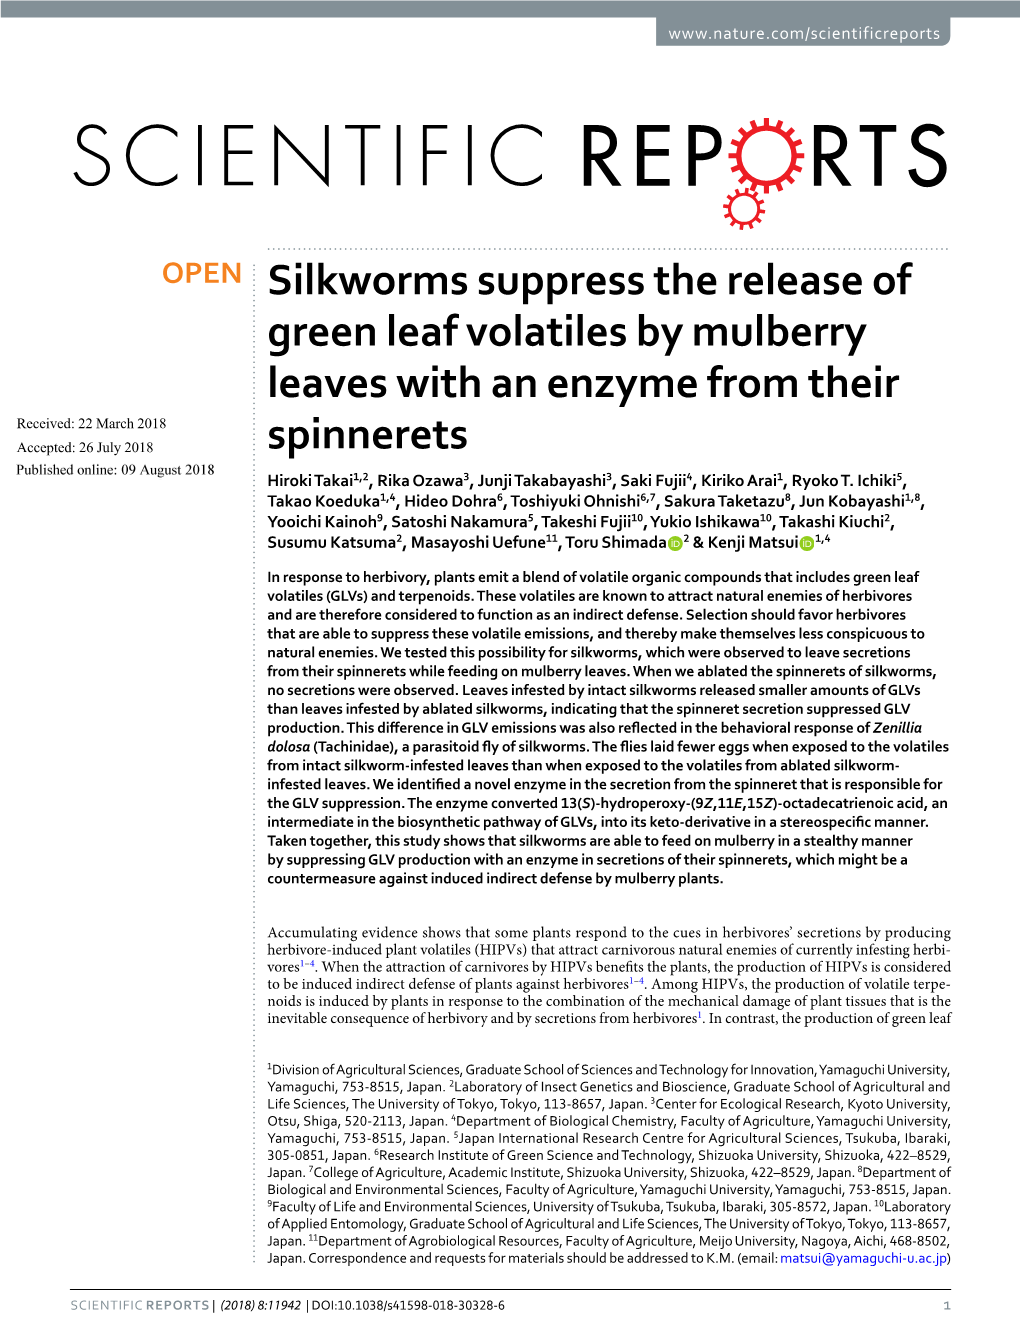 Silkworms Suppress the Release of Green Leaf Volatiles by Mulberry